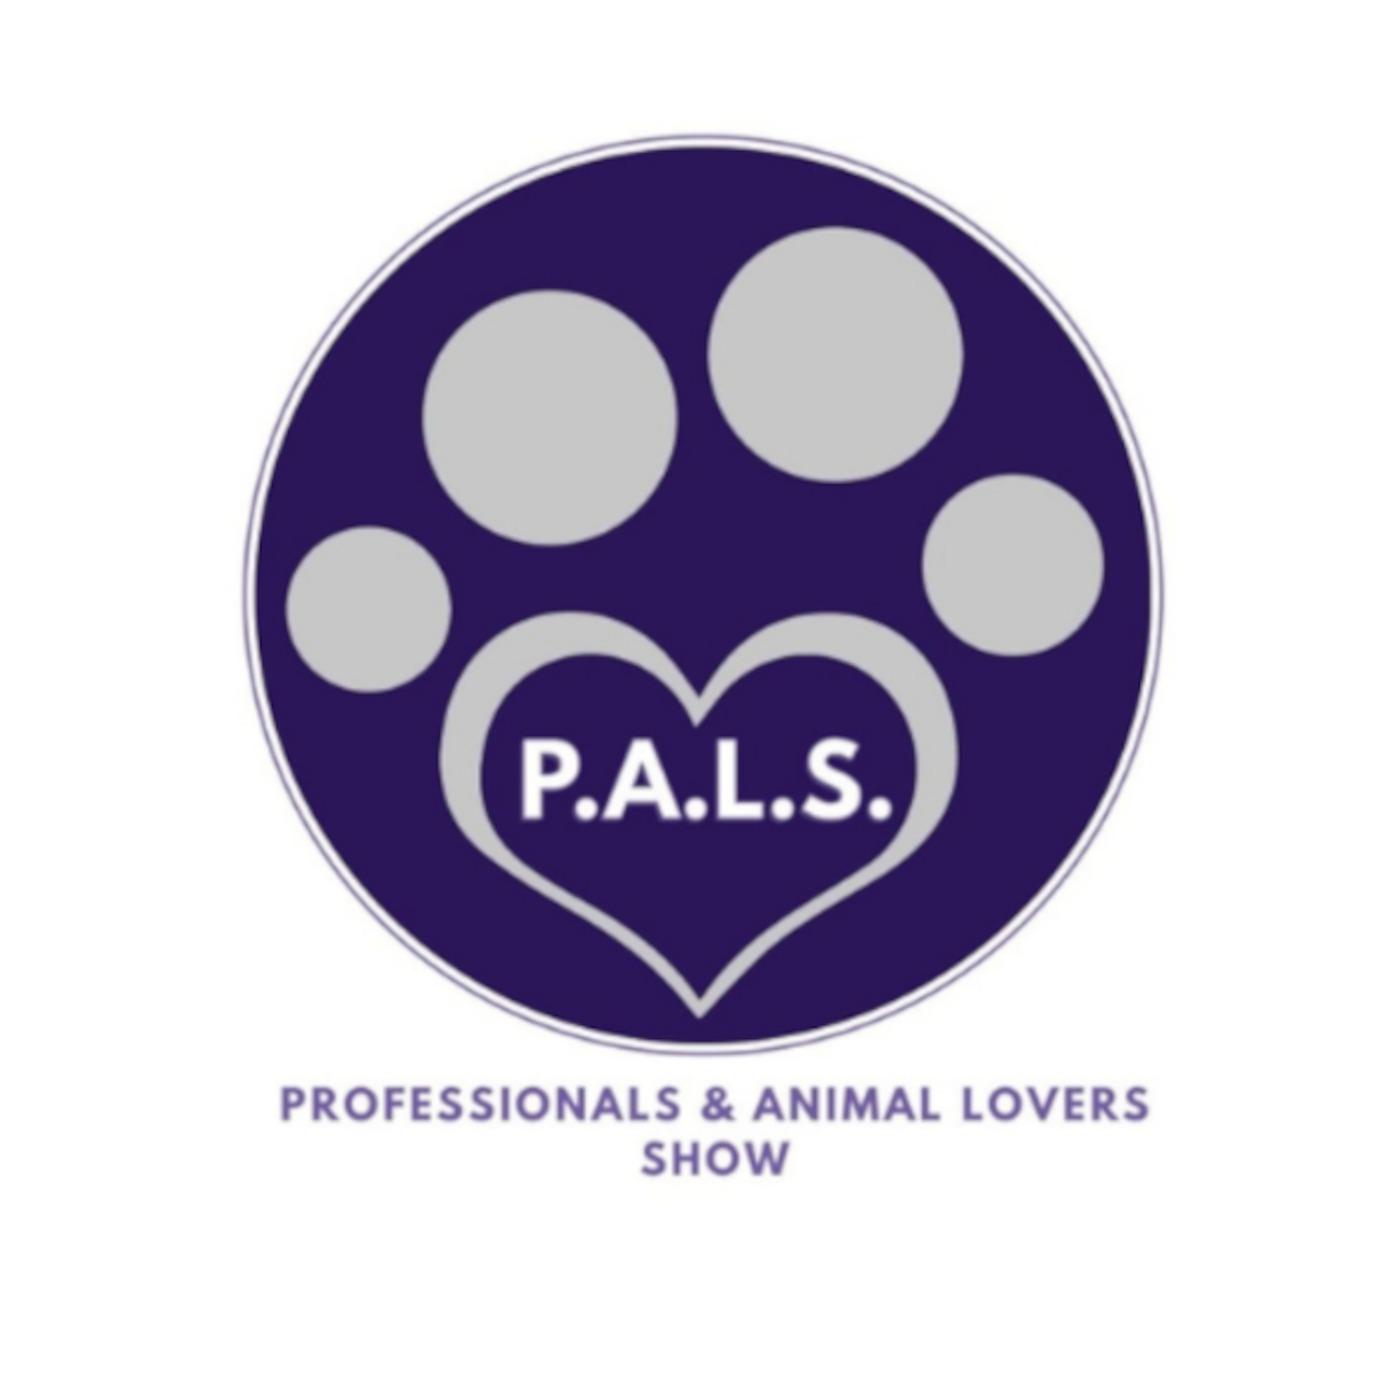 Professionals & Animal Lovers Show